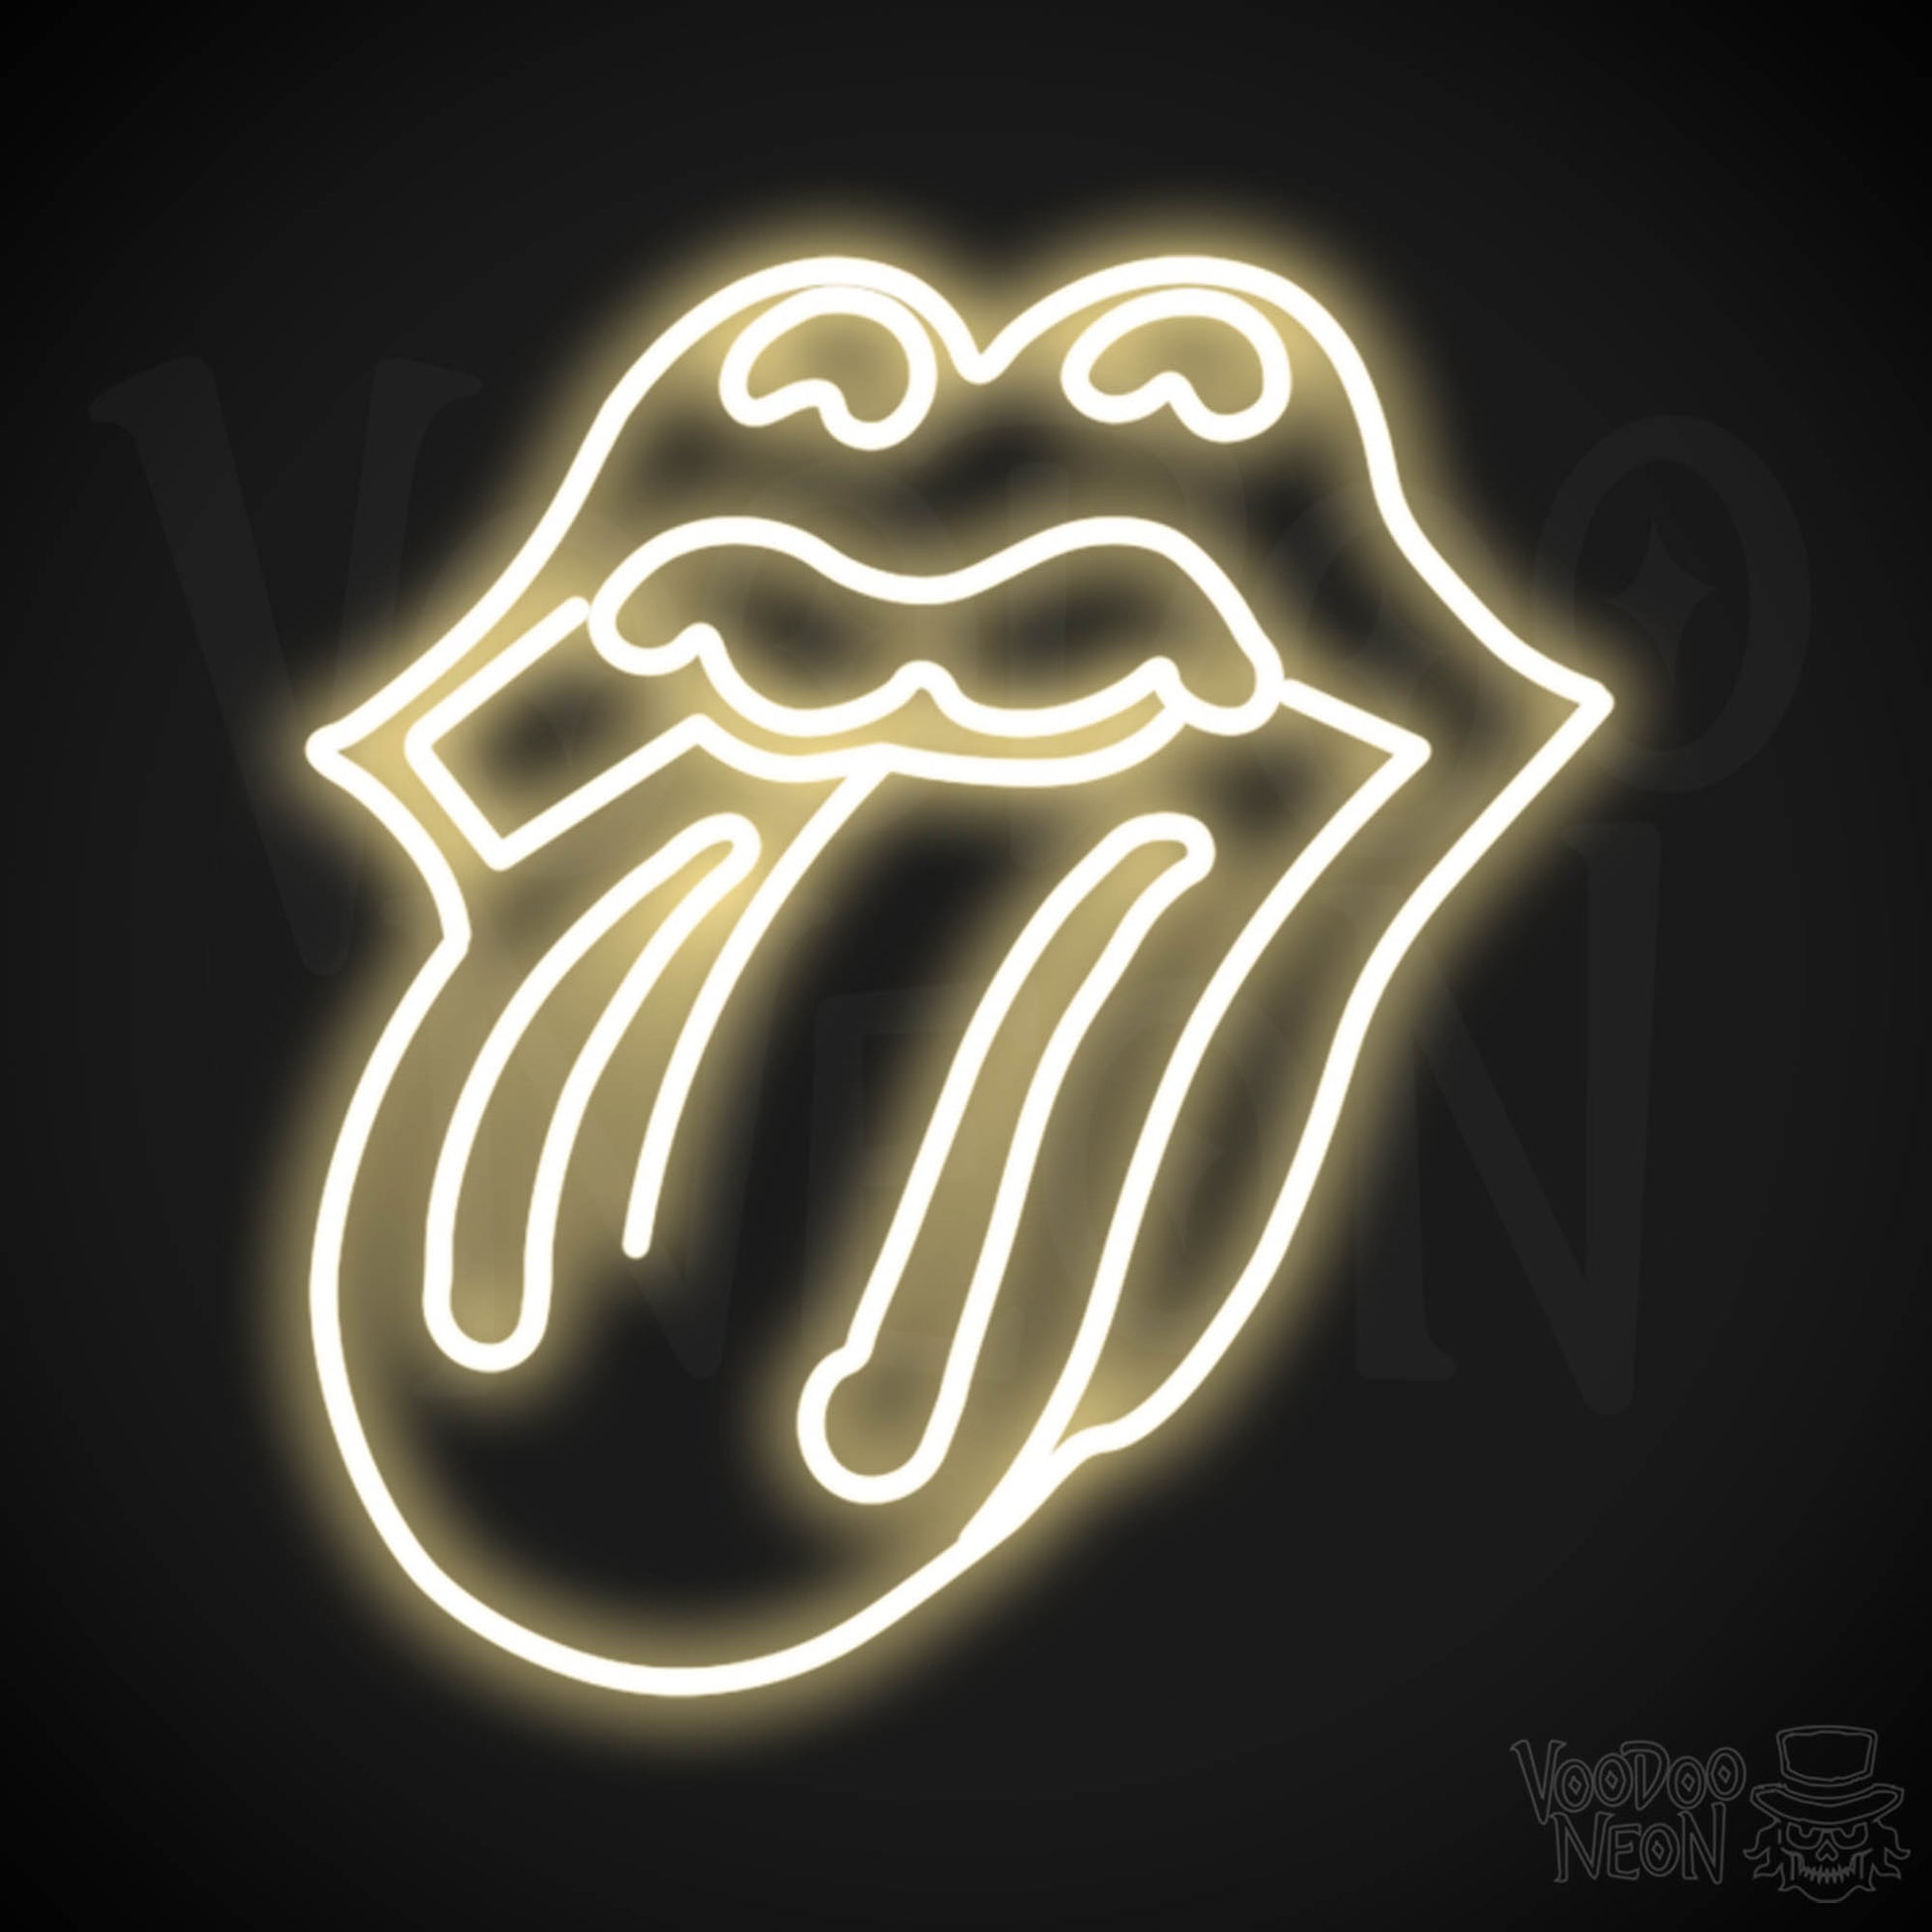 Rolling Stones Neon Sign - Rolling Stones Sign - Neon Rolling Stones Logo Wall Art - Color Warm White